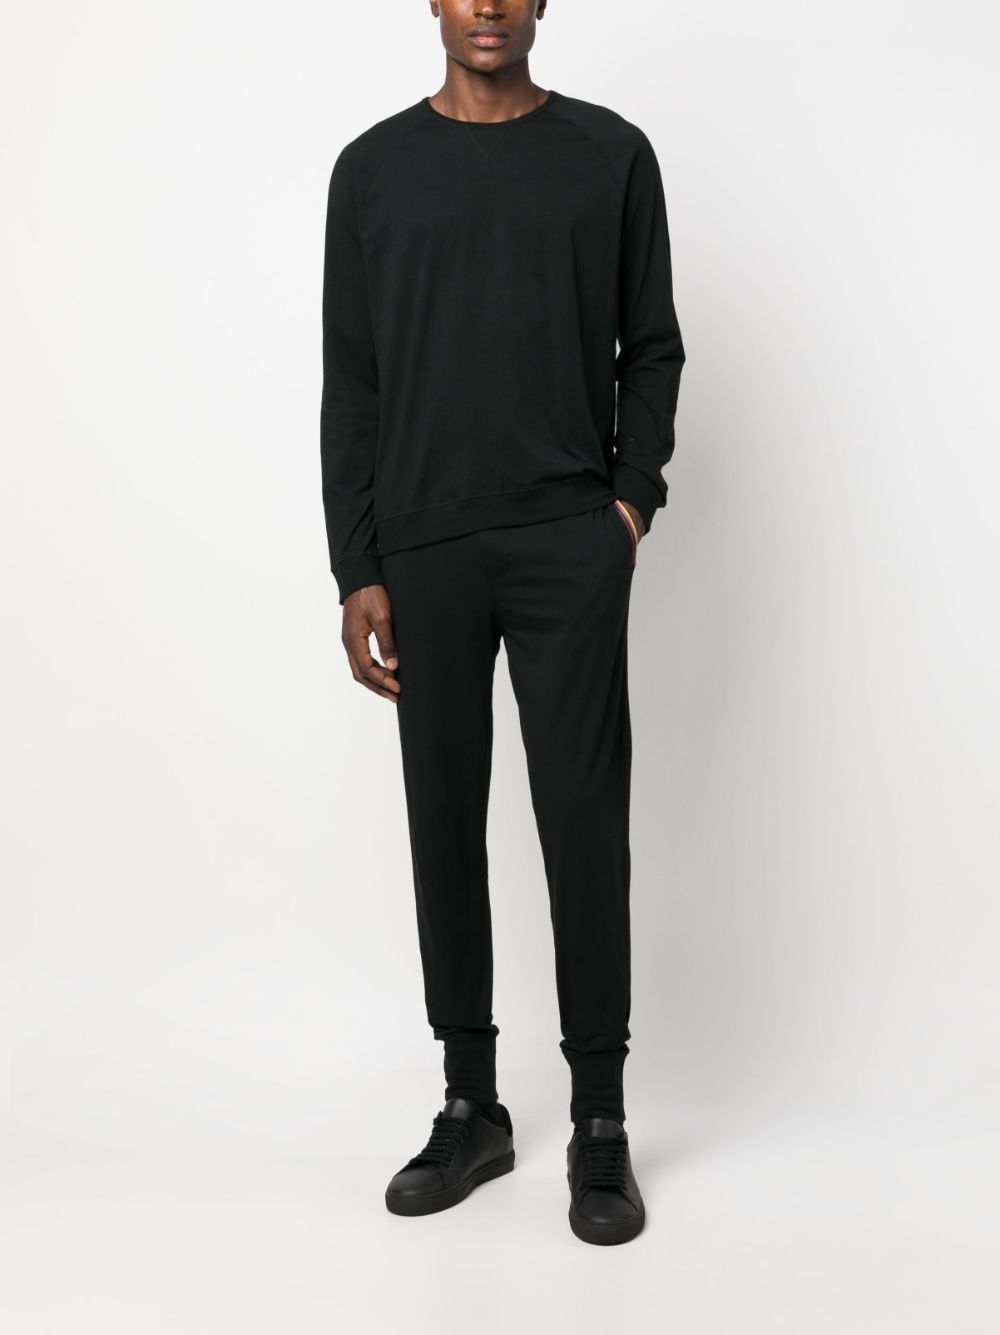 Paul Smith Trousers Black